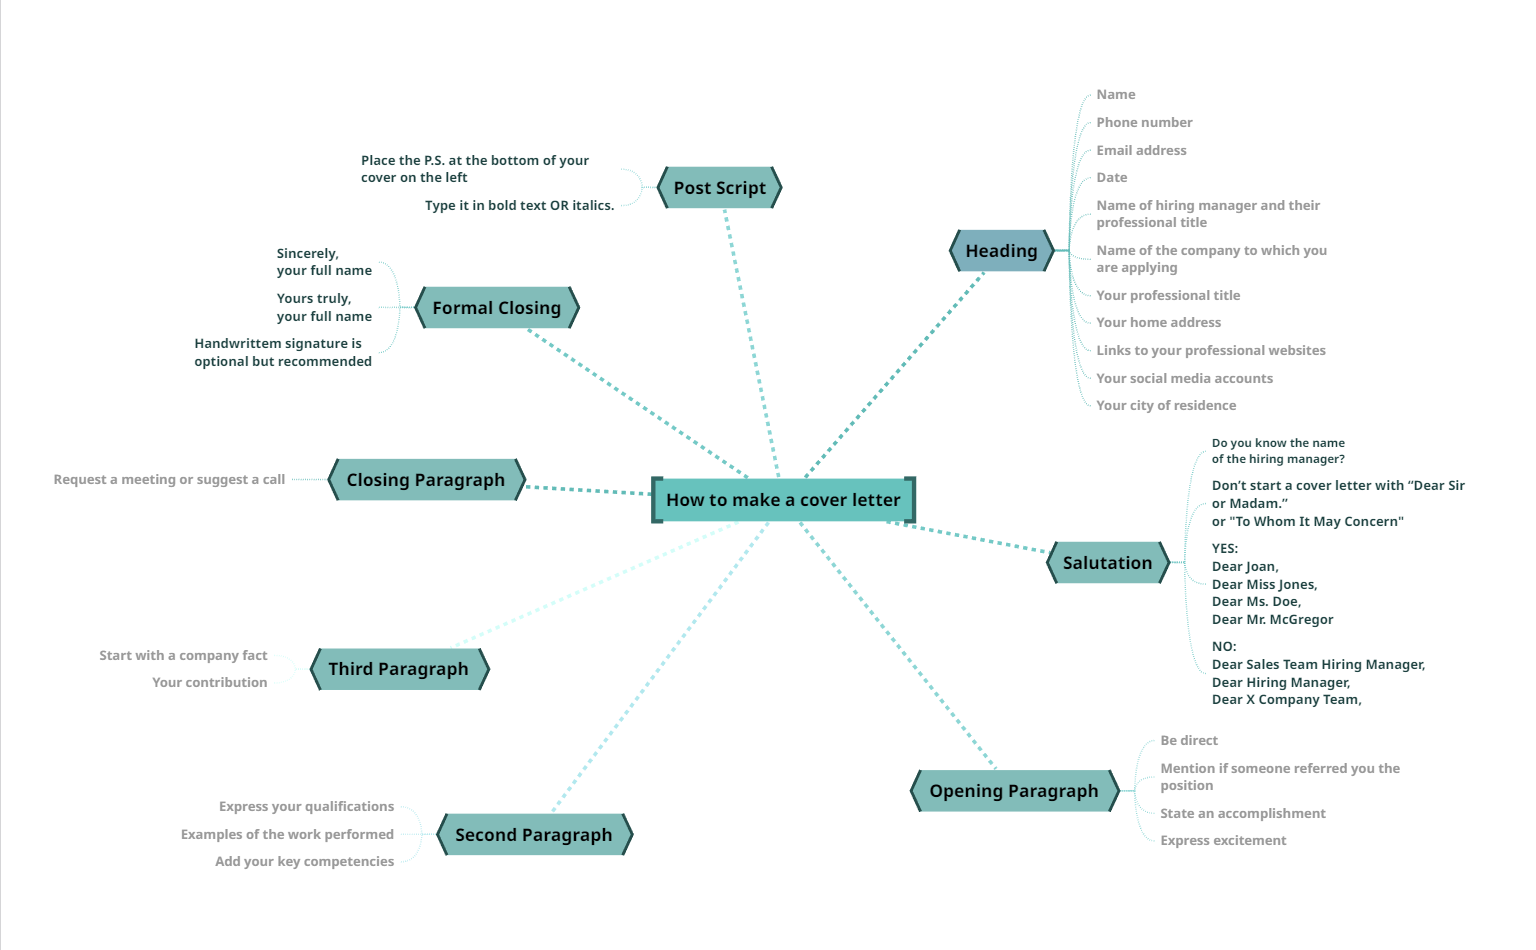 How to make a cover letter mind map template